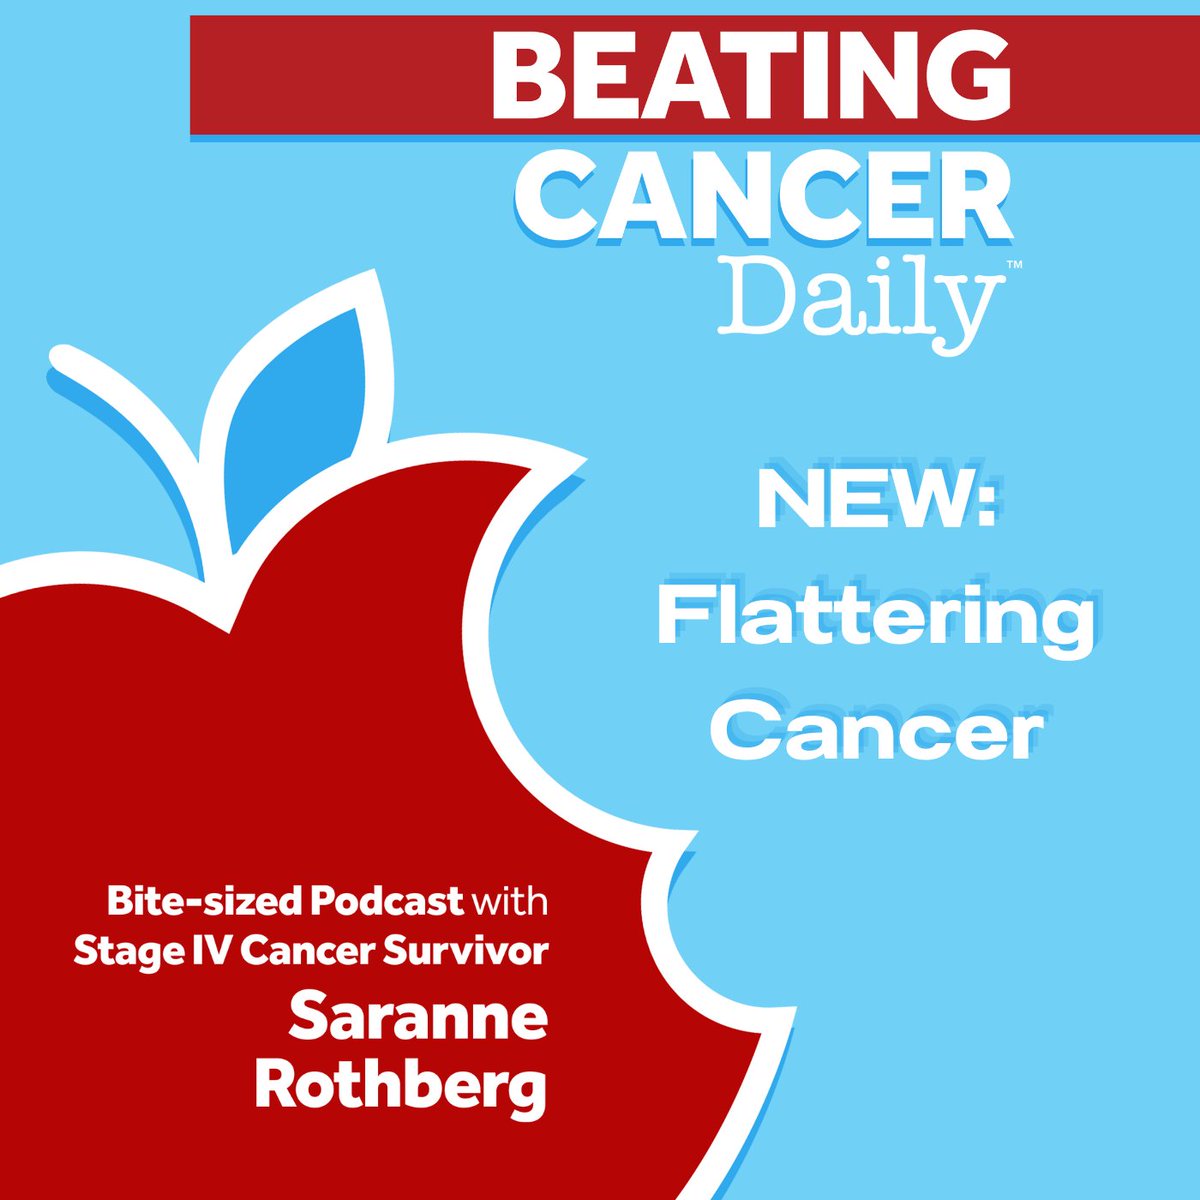 Today on #BeatingCancerDaily, Fan Favorite: Flattering Cancer
Listen wherever you listen to podcasts. 
ComedyCures.org

#ComedyCures #LaughDaily #InstaLaugh #laughtherapy #NonProfit #nonprofitlife #standupcomedian #survivor #remission #cancersurvivor #cancertreatment